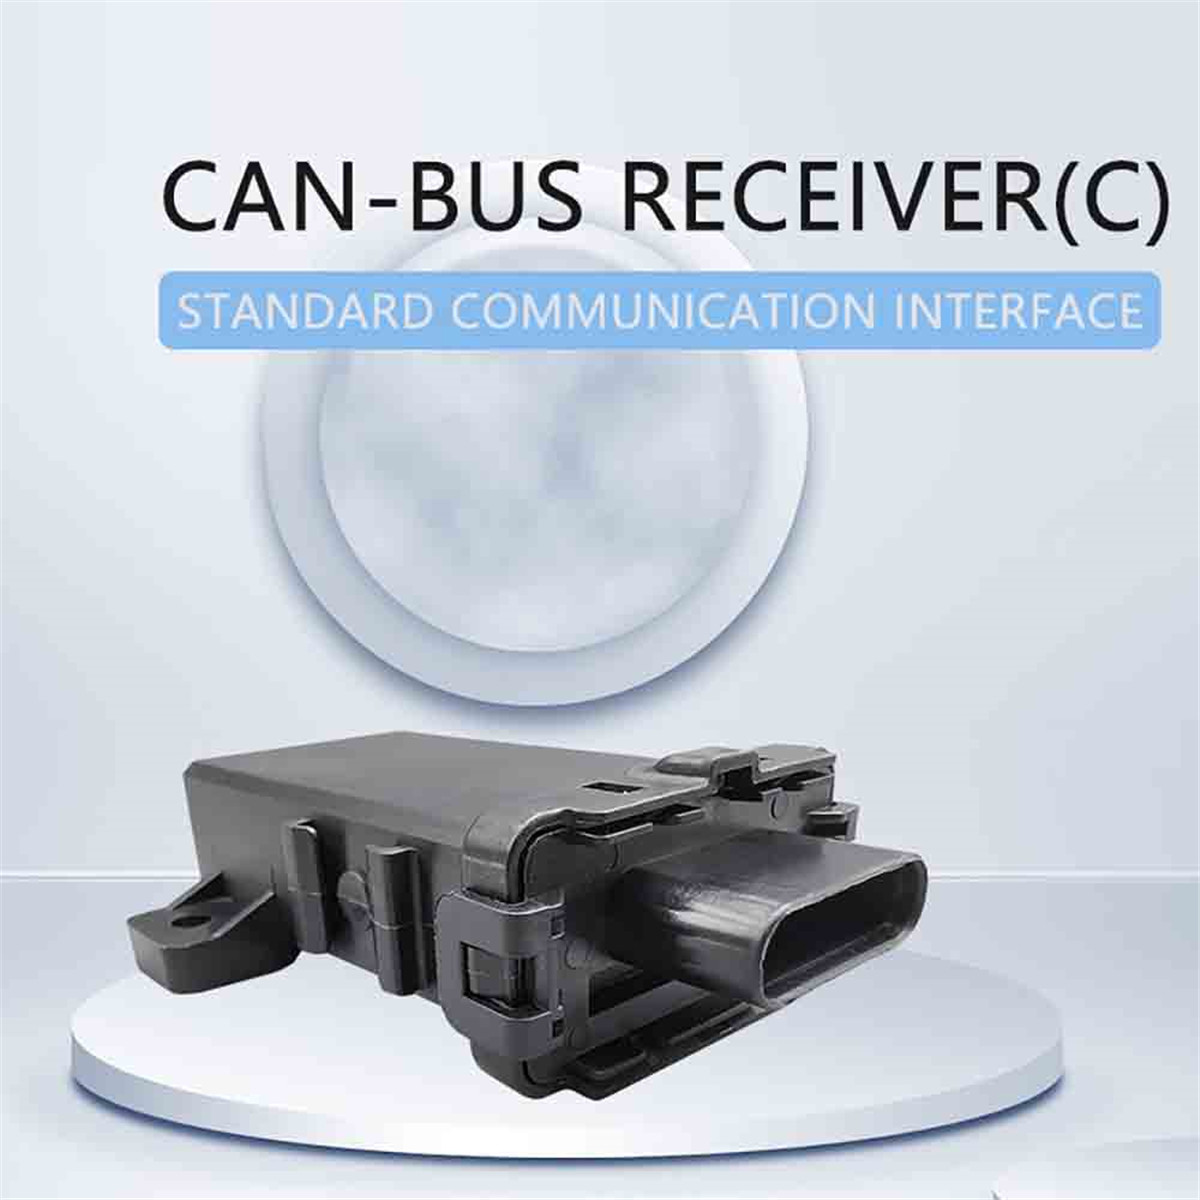 CAN-Bus receiver01 (8)